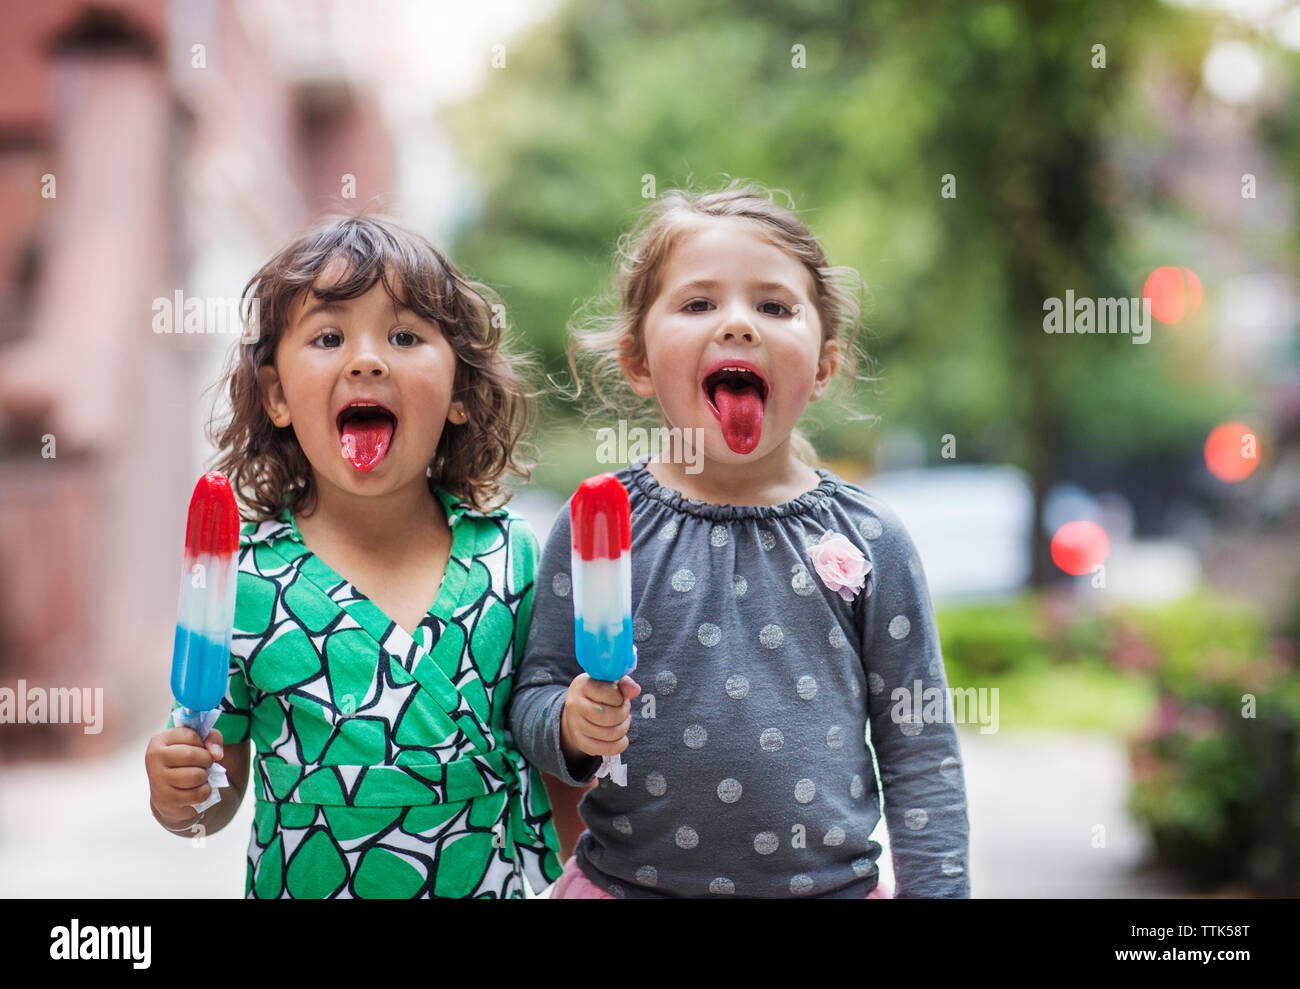 Portrait of girls sticking out tongue while holding ice lollies Stock Photo